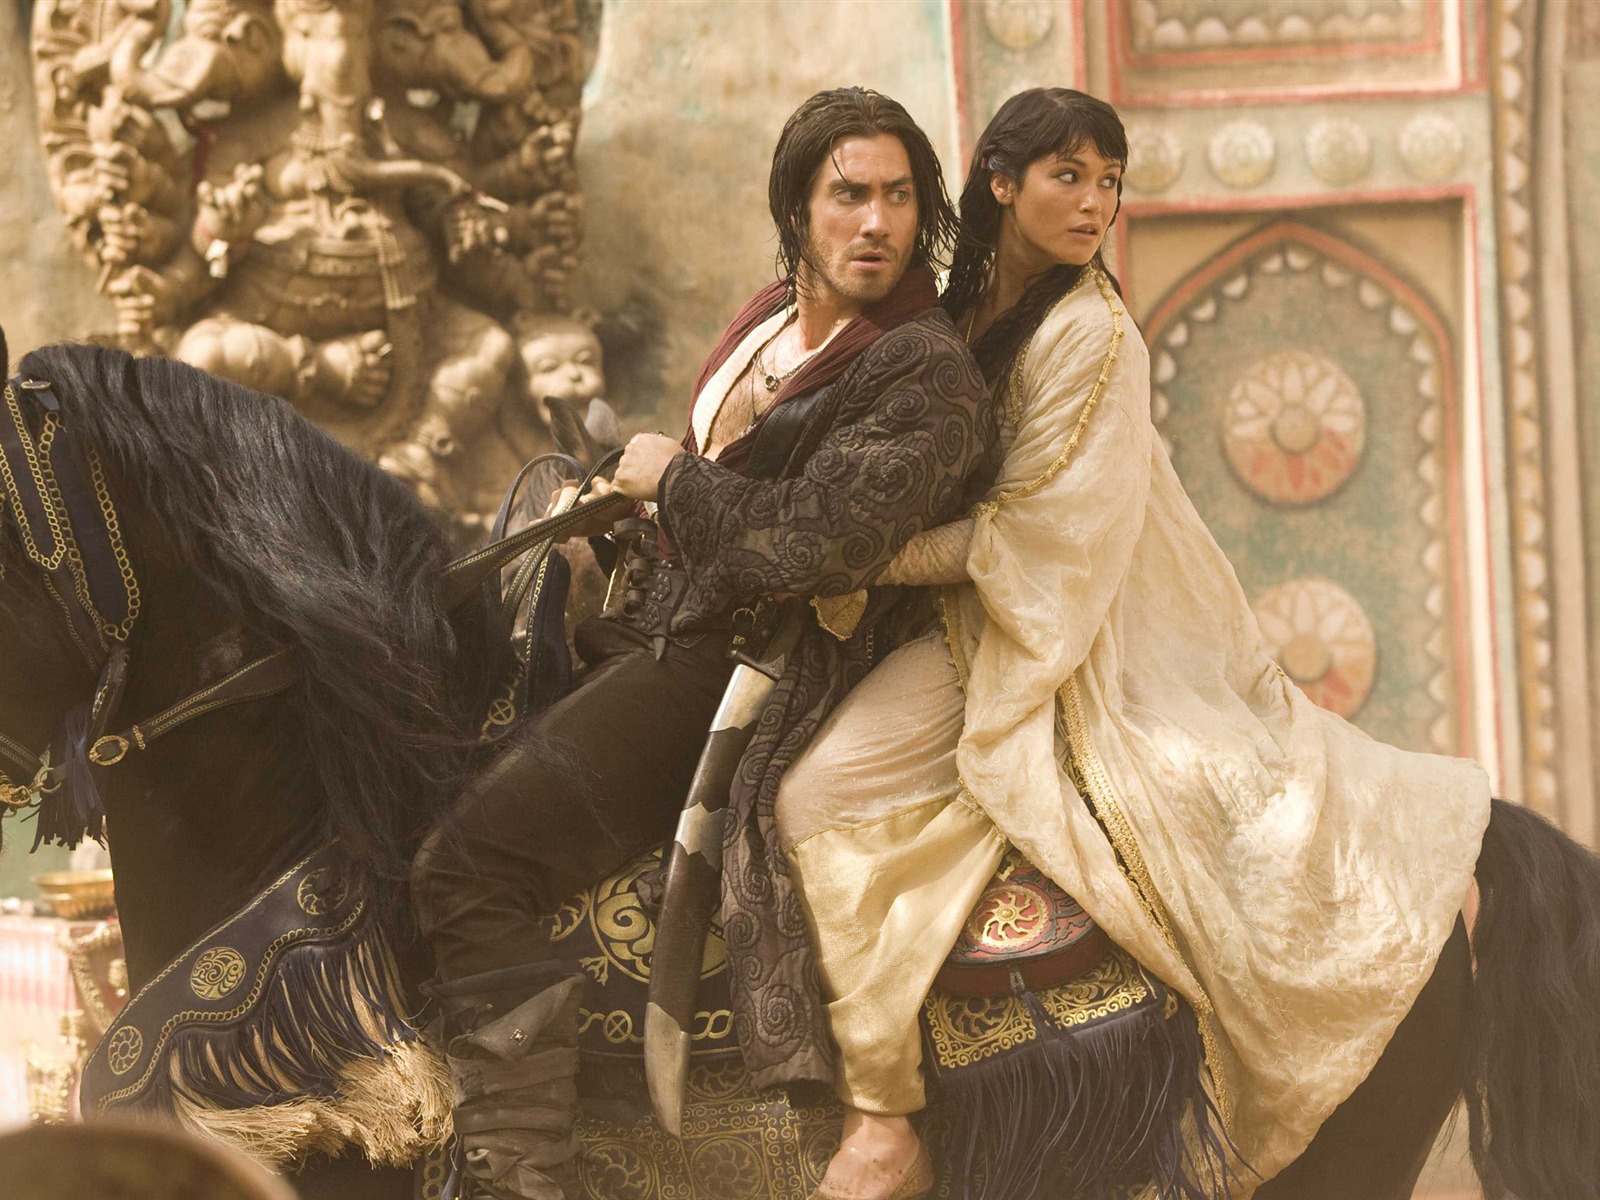 Prince of Persia The Sands of Time 波斯王子：时之刃3 - 1600x1200